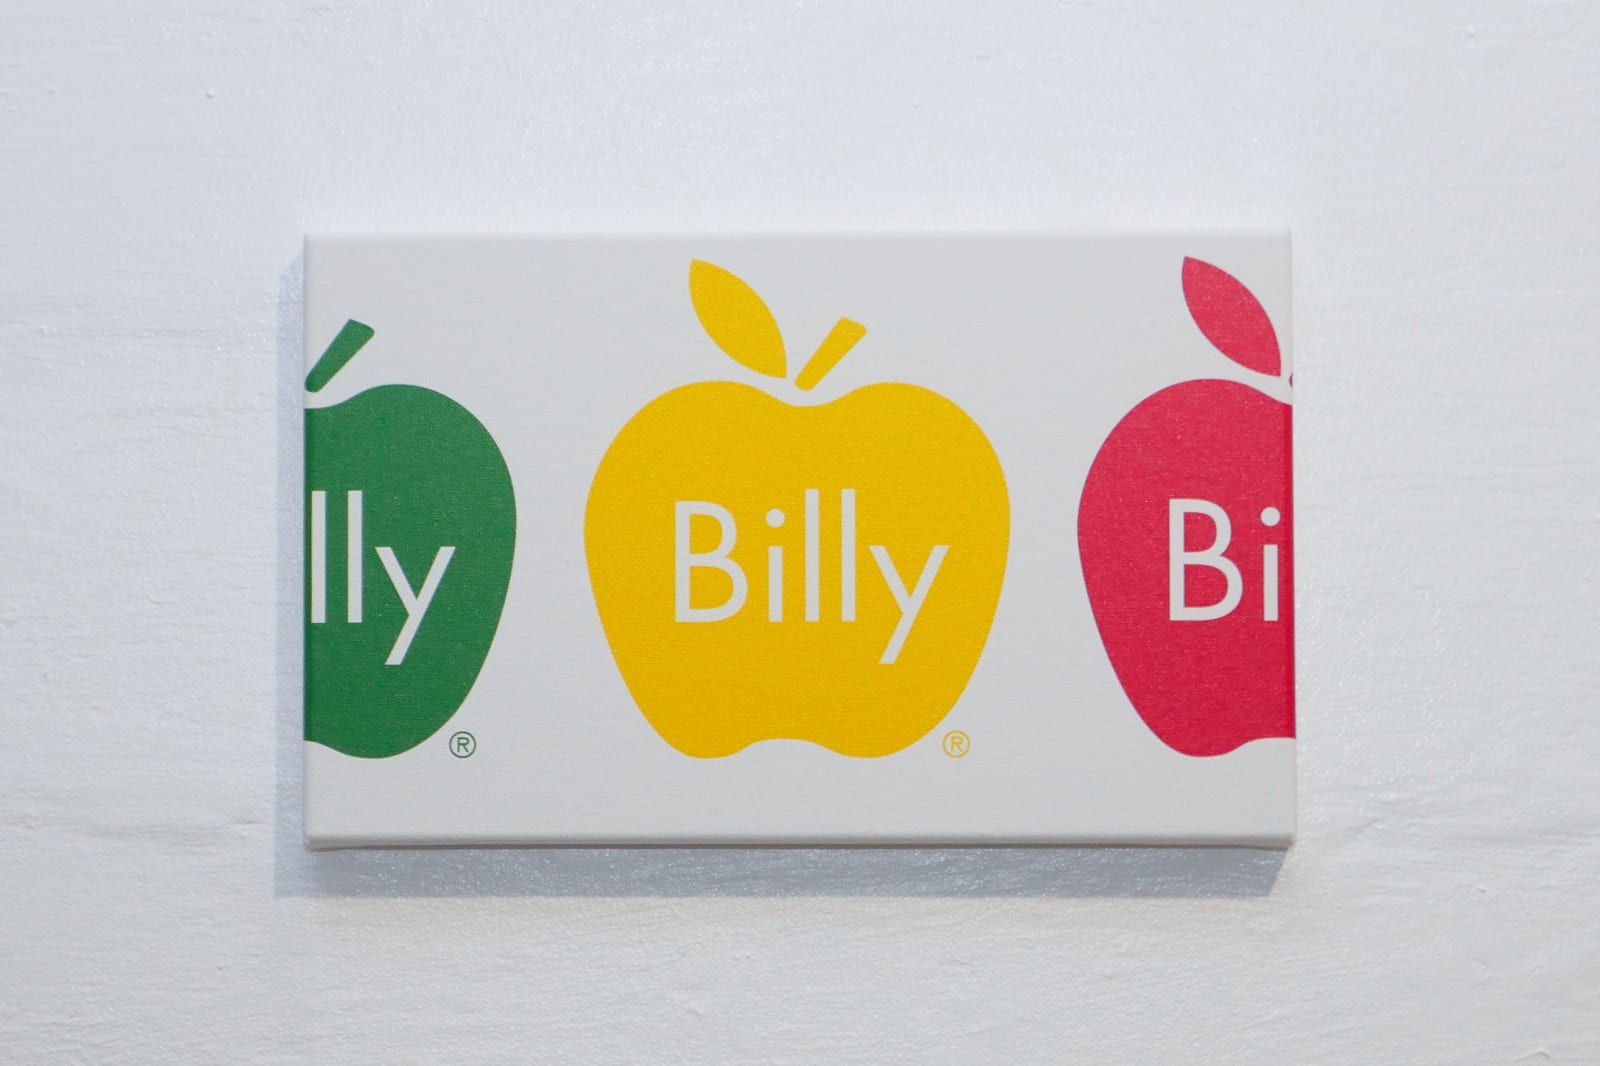 Billy Apple, Frieze (green, yellow, red on white), 2018